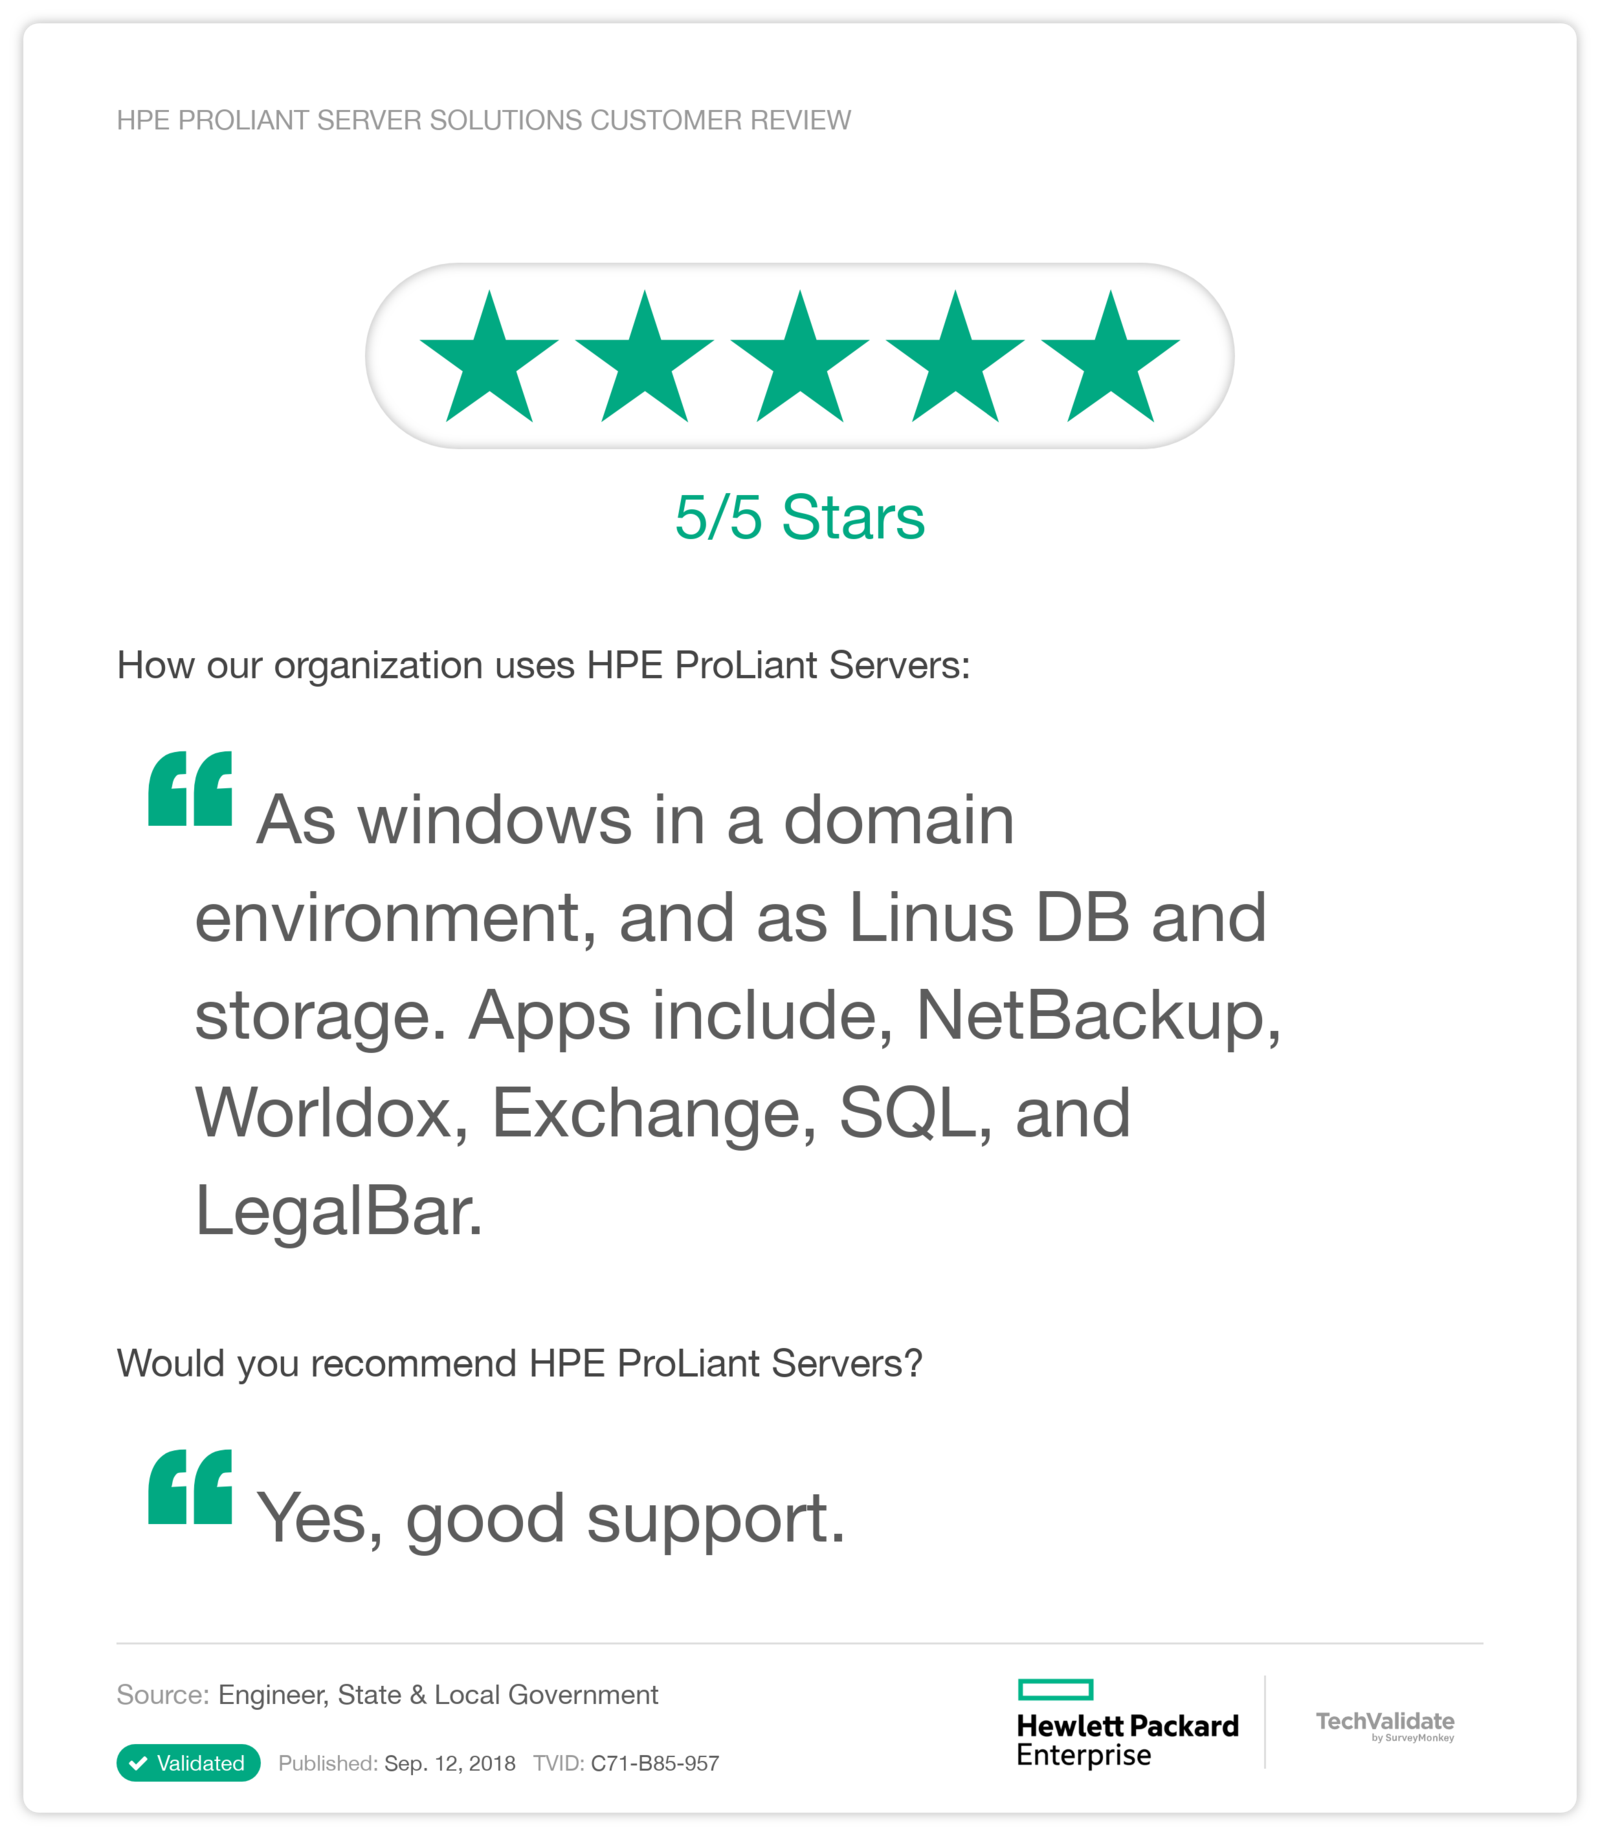 HPE ProLiant Server Solutions Customer Review